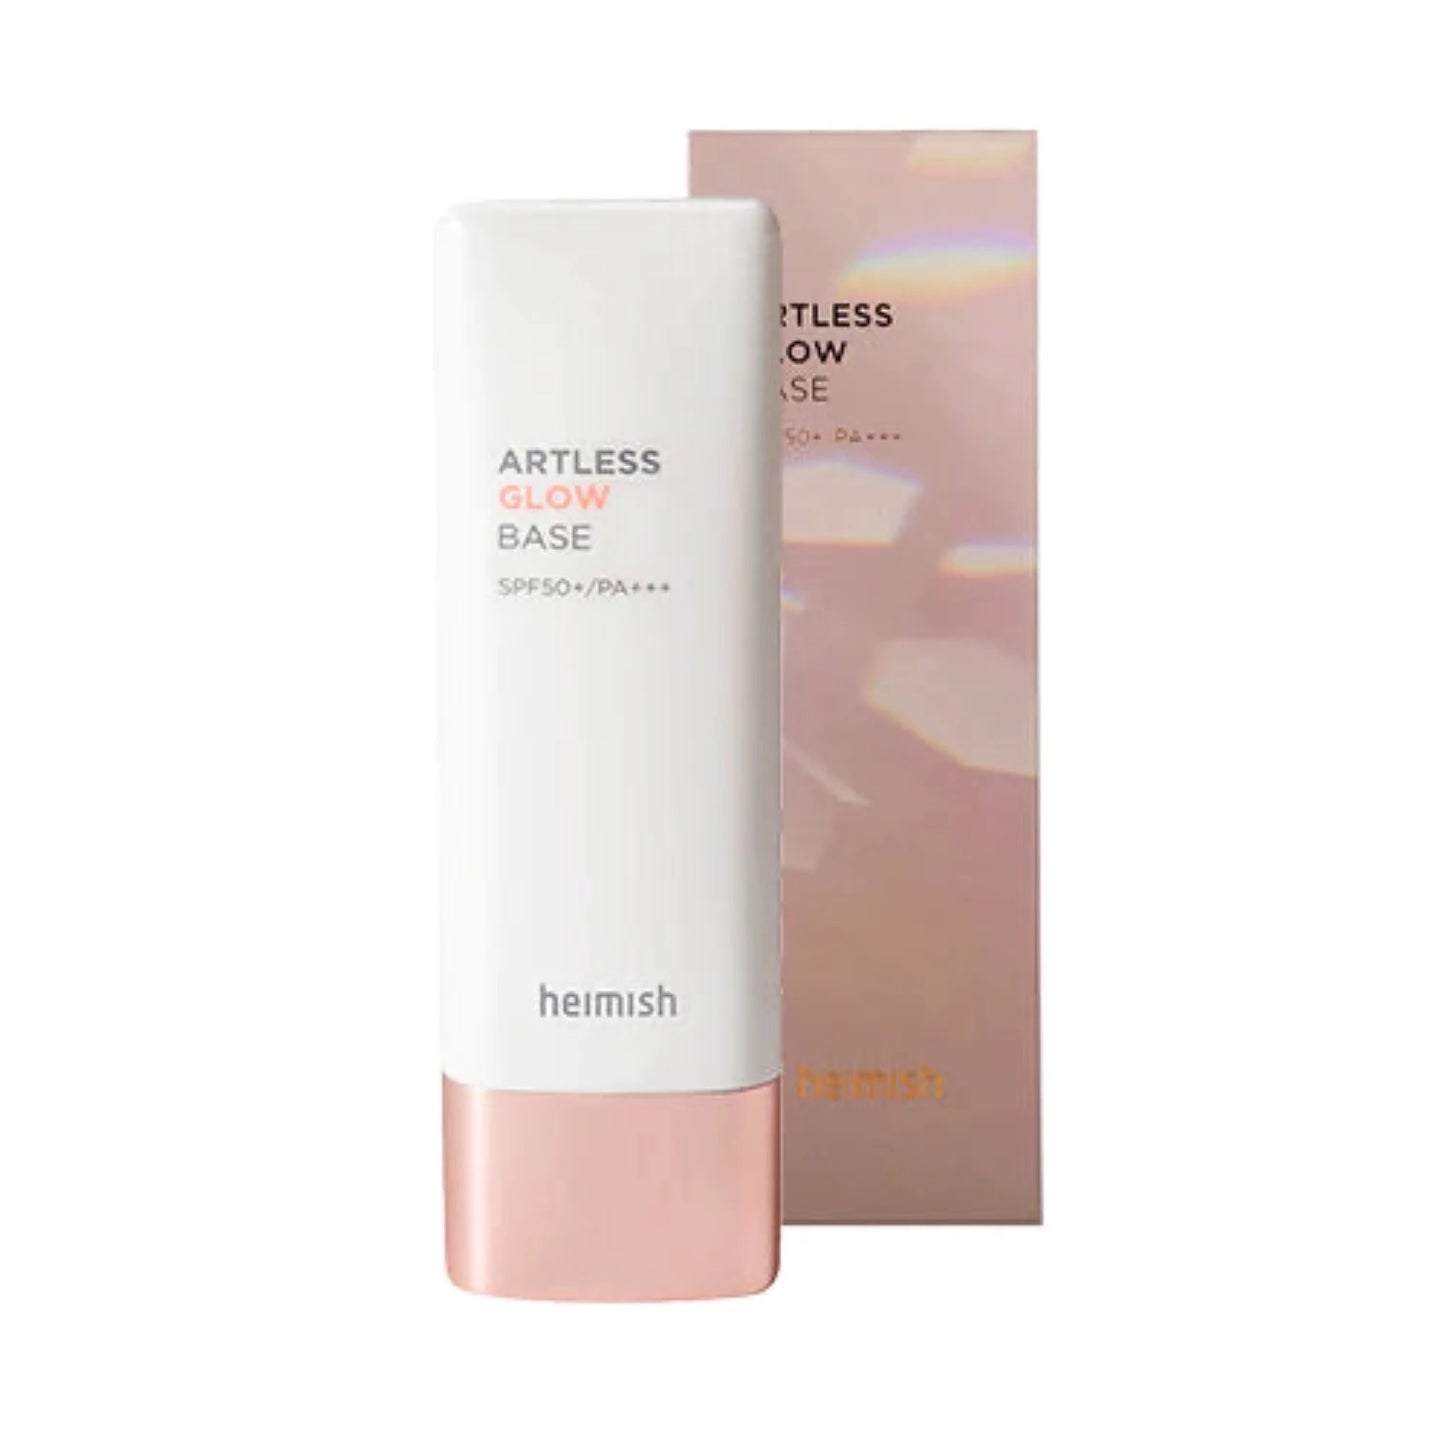 Heimish Artless Glow Base can be used alone or as a base for makeup, making it an excellent addition to any skincare and makeup routine